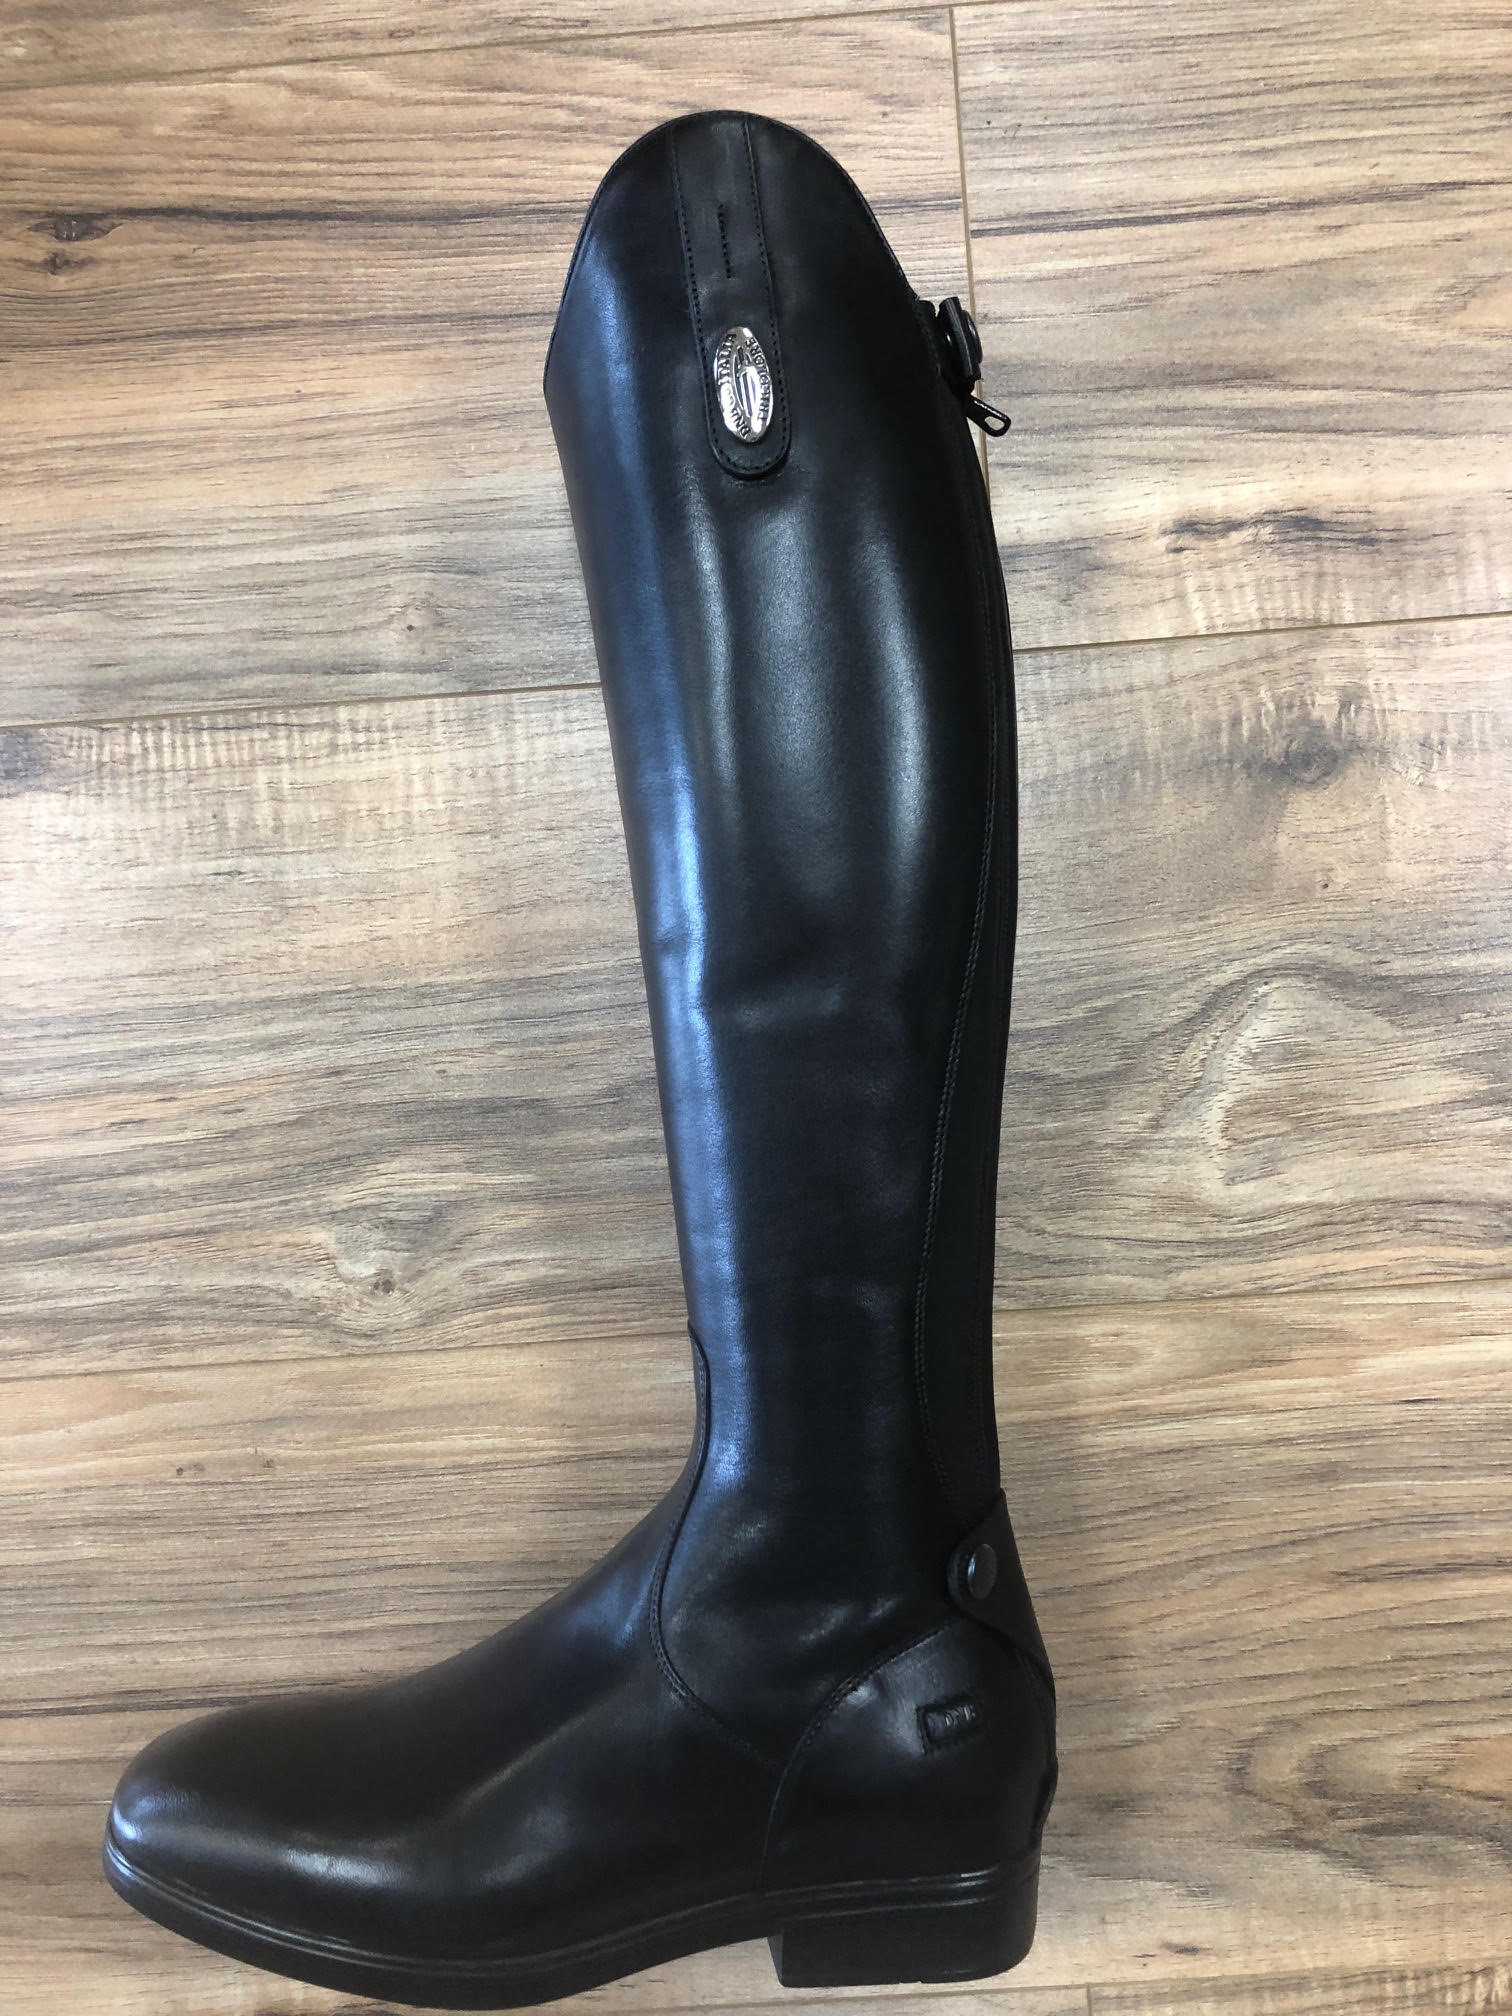 Gee Gee Equine Amabile Tricolore Tall Boots for Riders